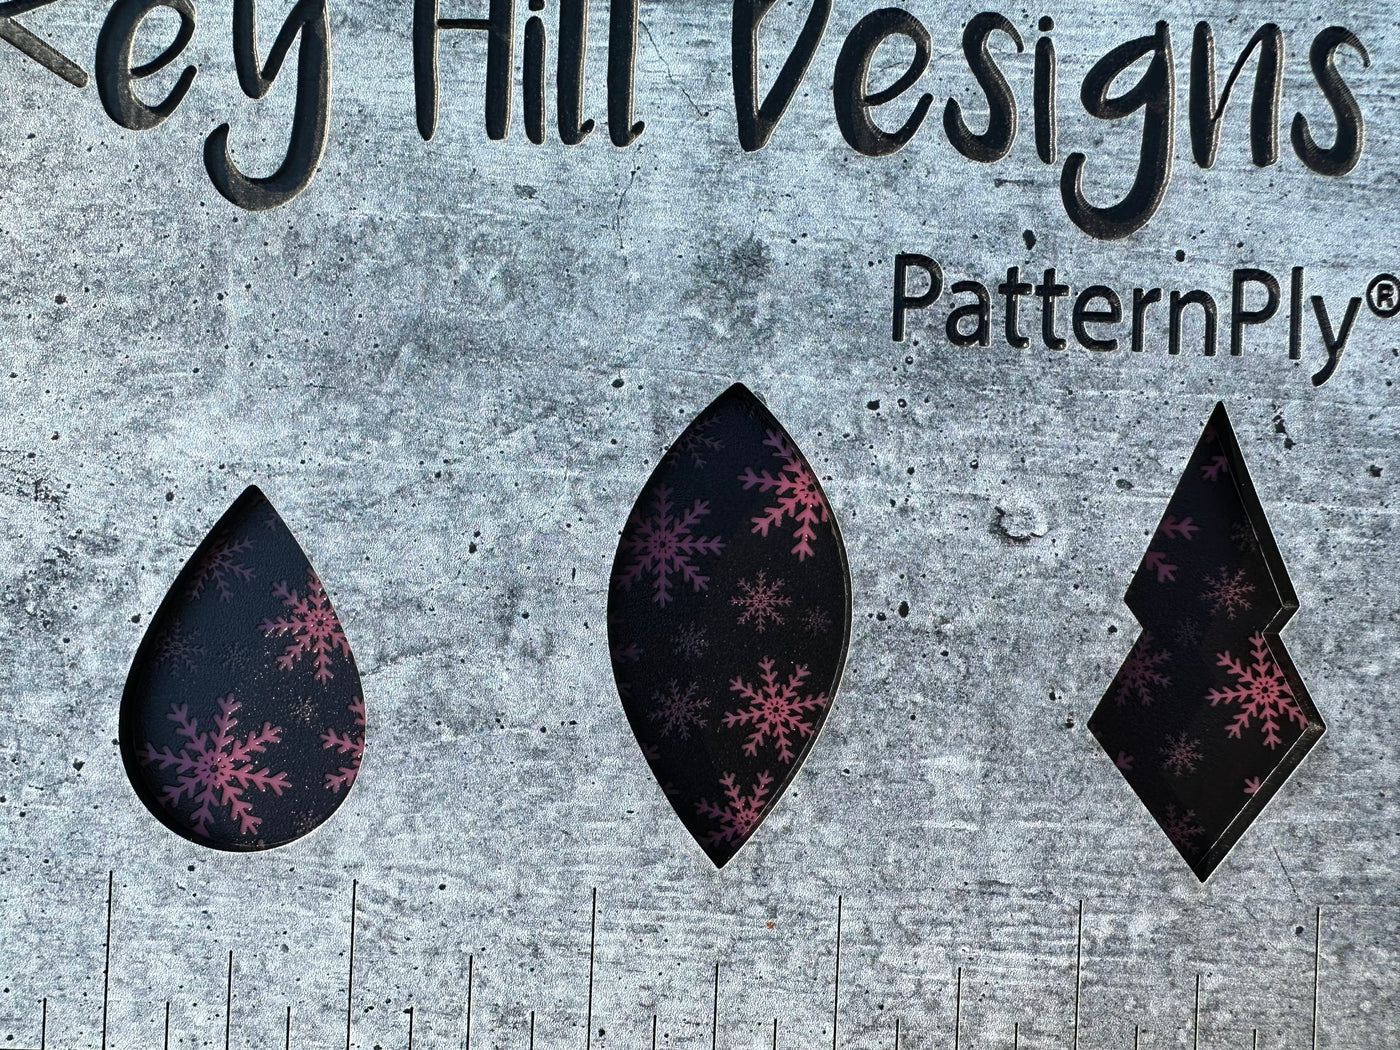 PatternPly® Scattered Snowflakes BLACK